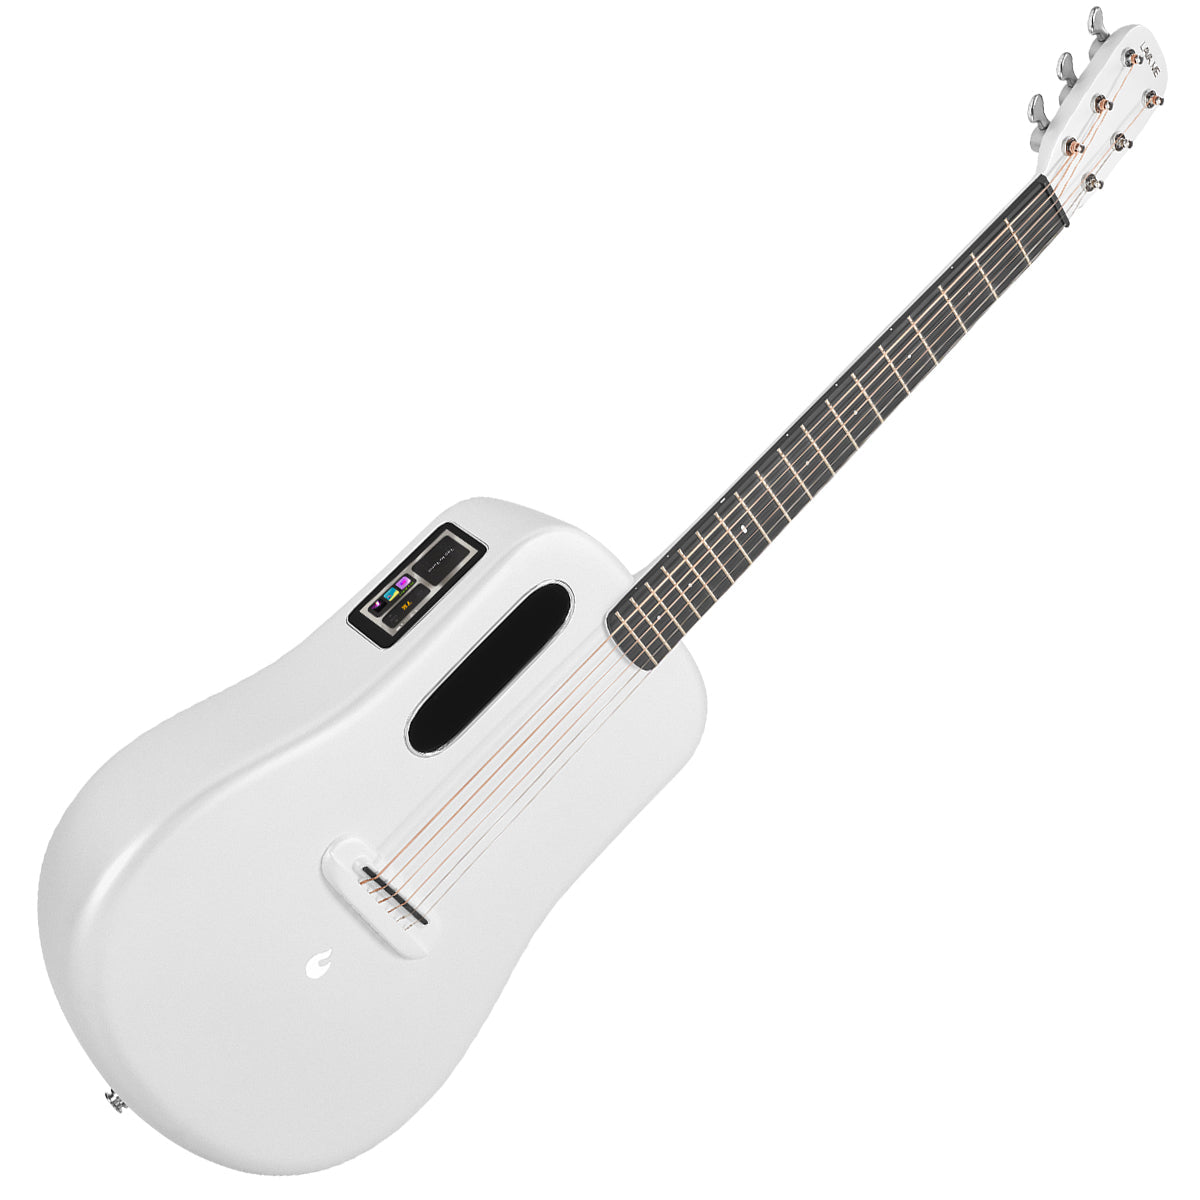 LAVA ME 3 38" with Space Bag ~ White, Acoustic Guitar for sale at Richards Guitars.